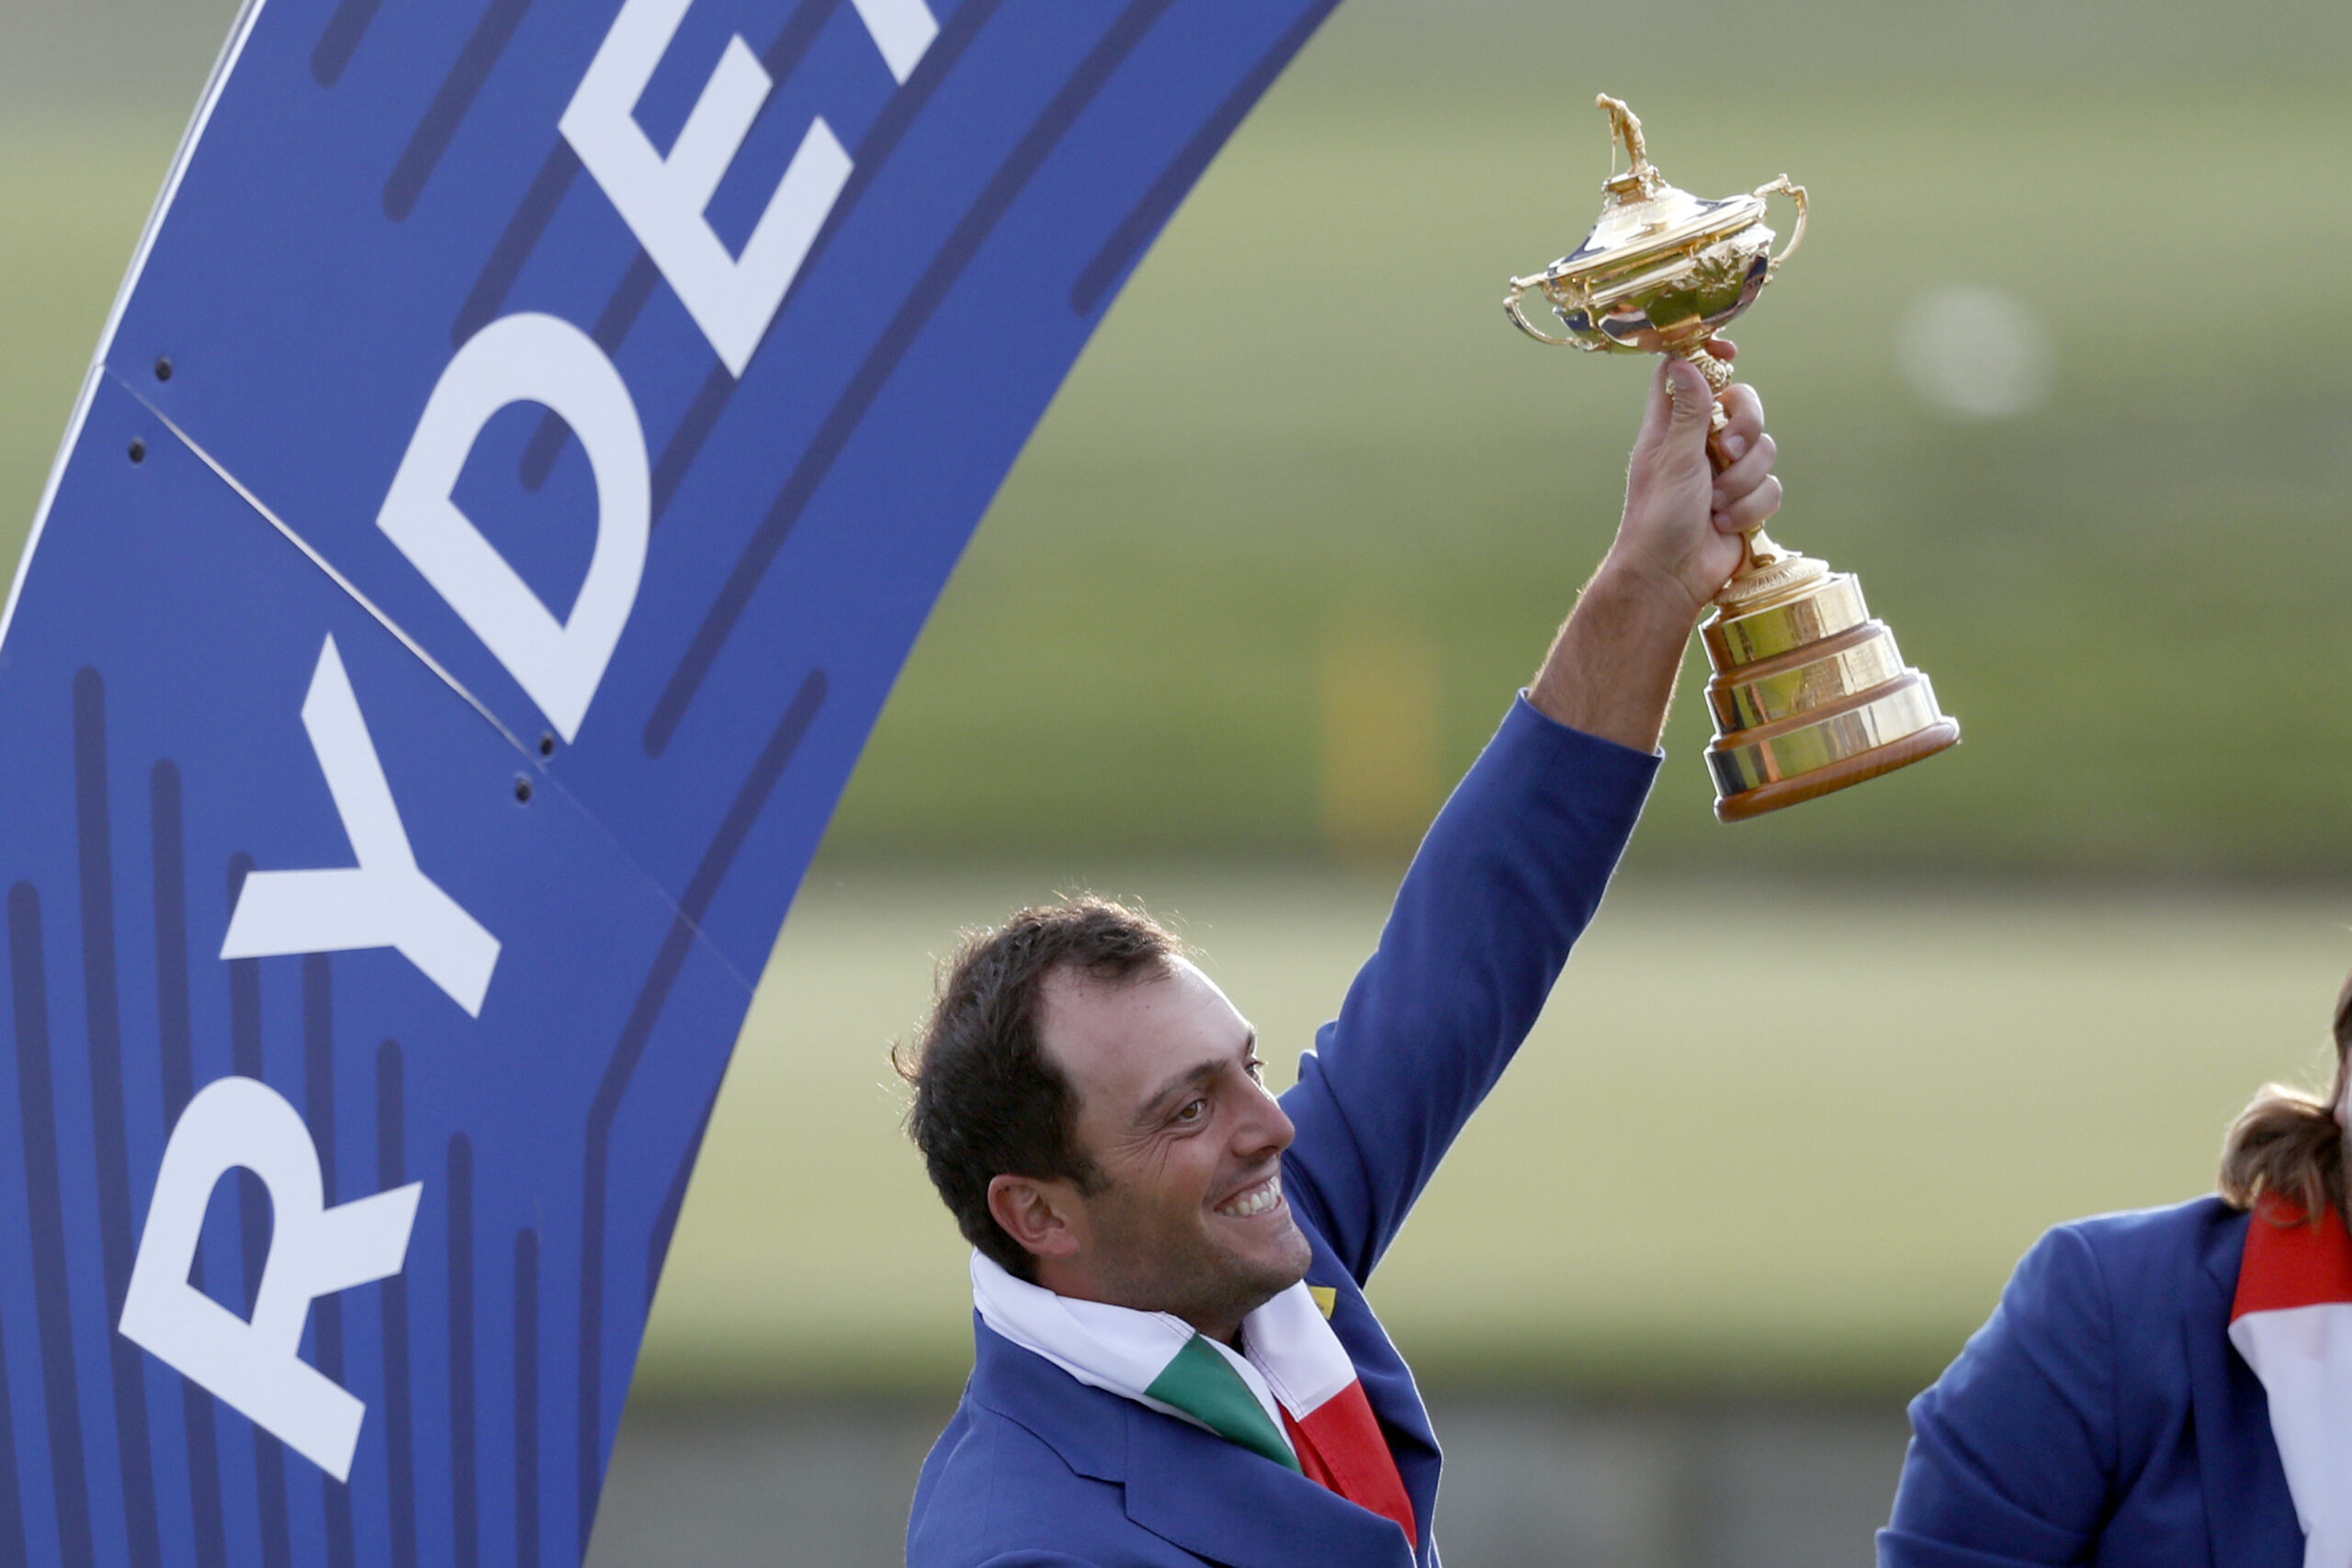 Francesco Molinari holds up the trophy after European team won the 2018 Ryder Cup golf tournament